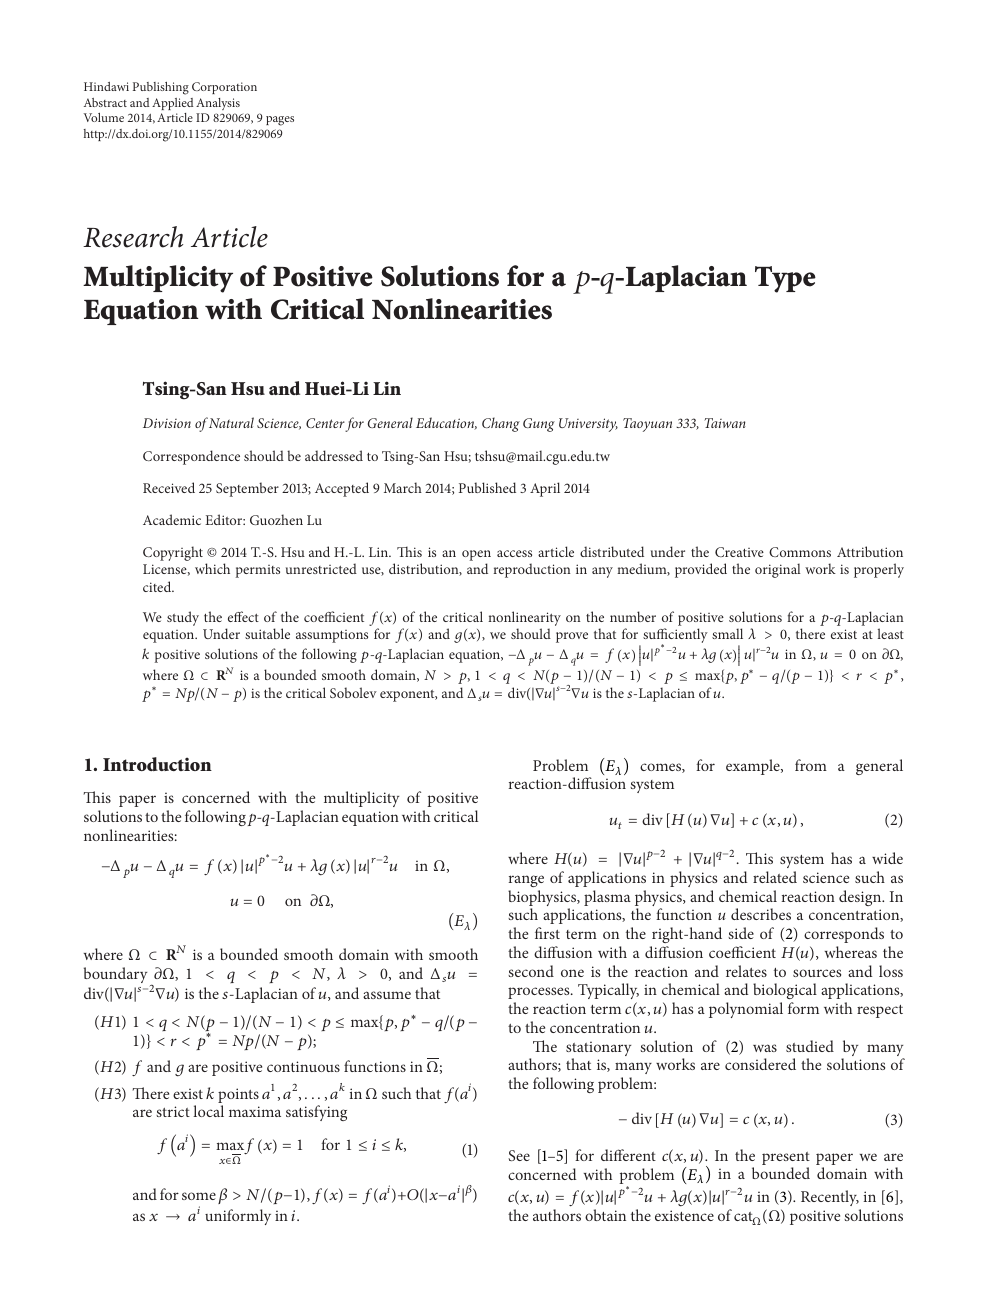 Multiplicity Of Positive Solutions For A Laplacian Type Equation With Critical Nonlinearities Topic Of Research Paper In Mathematics Download Scholarly Article Pdf And Read For Free On Cyberleninka Open Science Hub